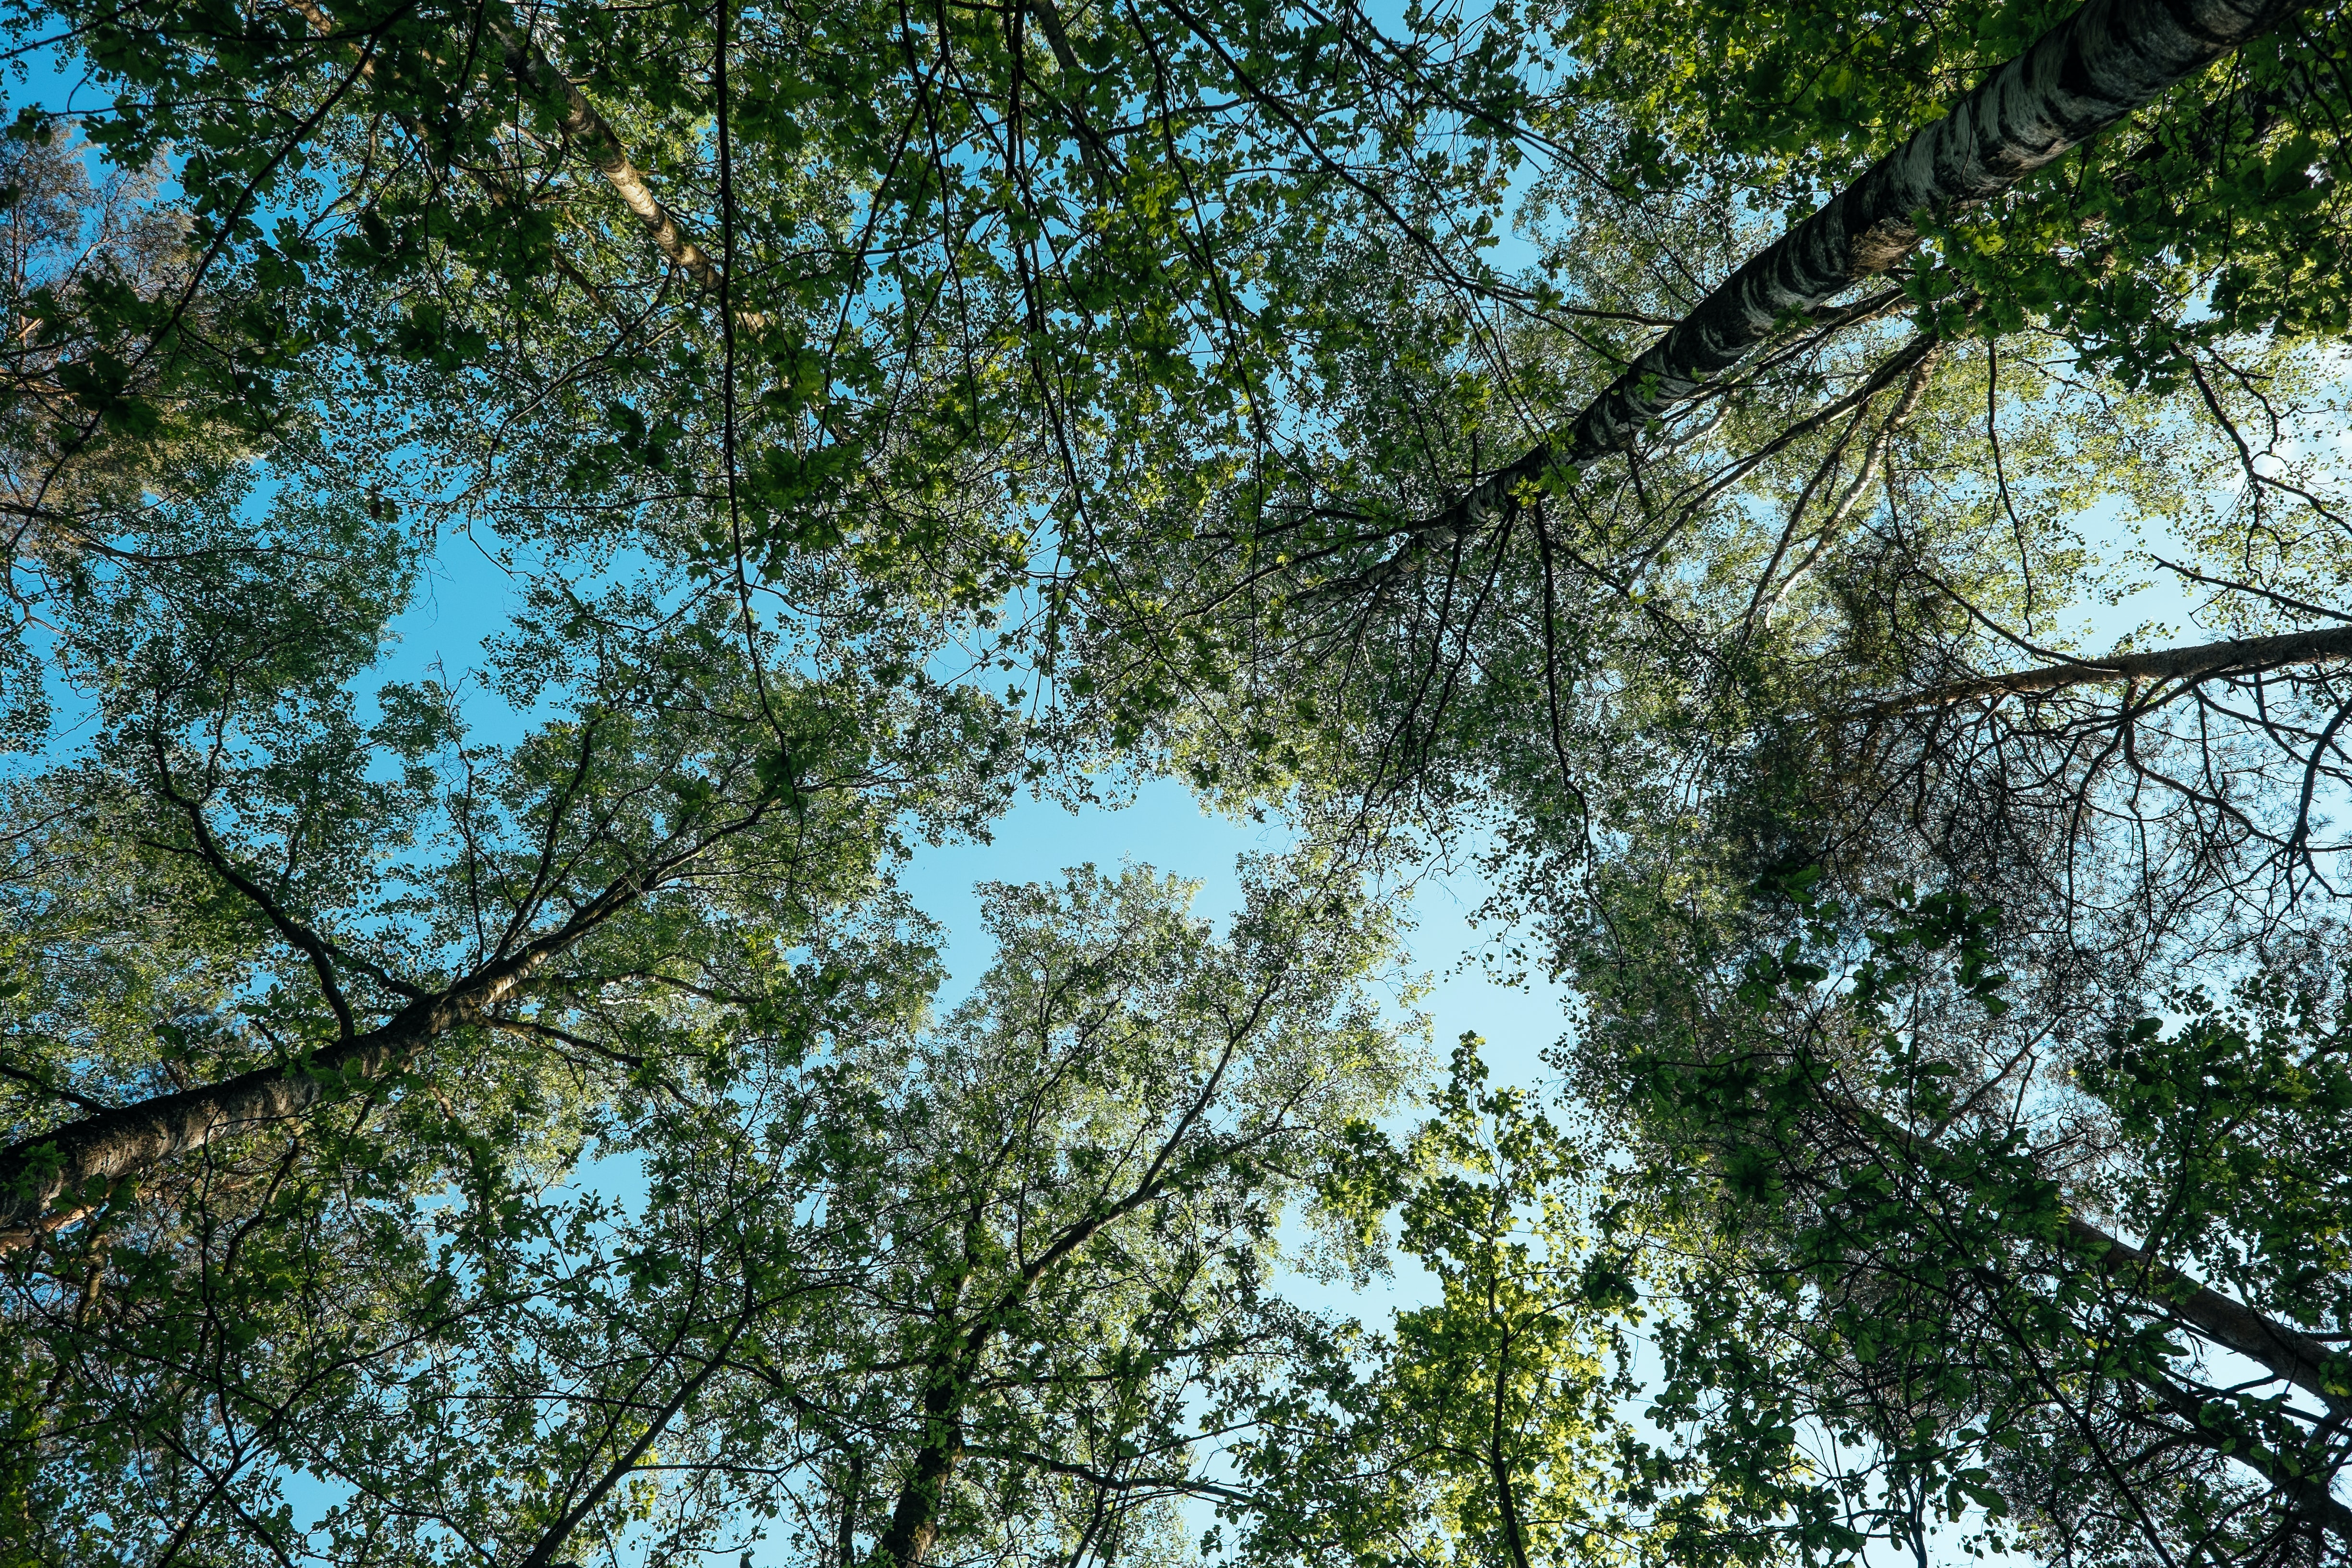 worm's-eye view of green trees